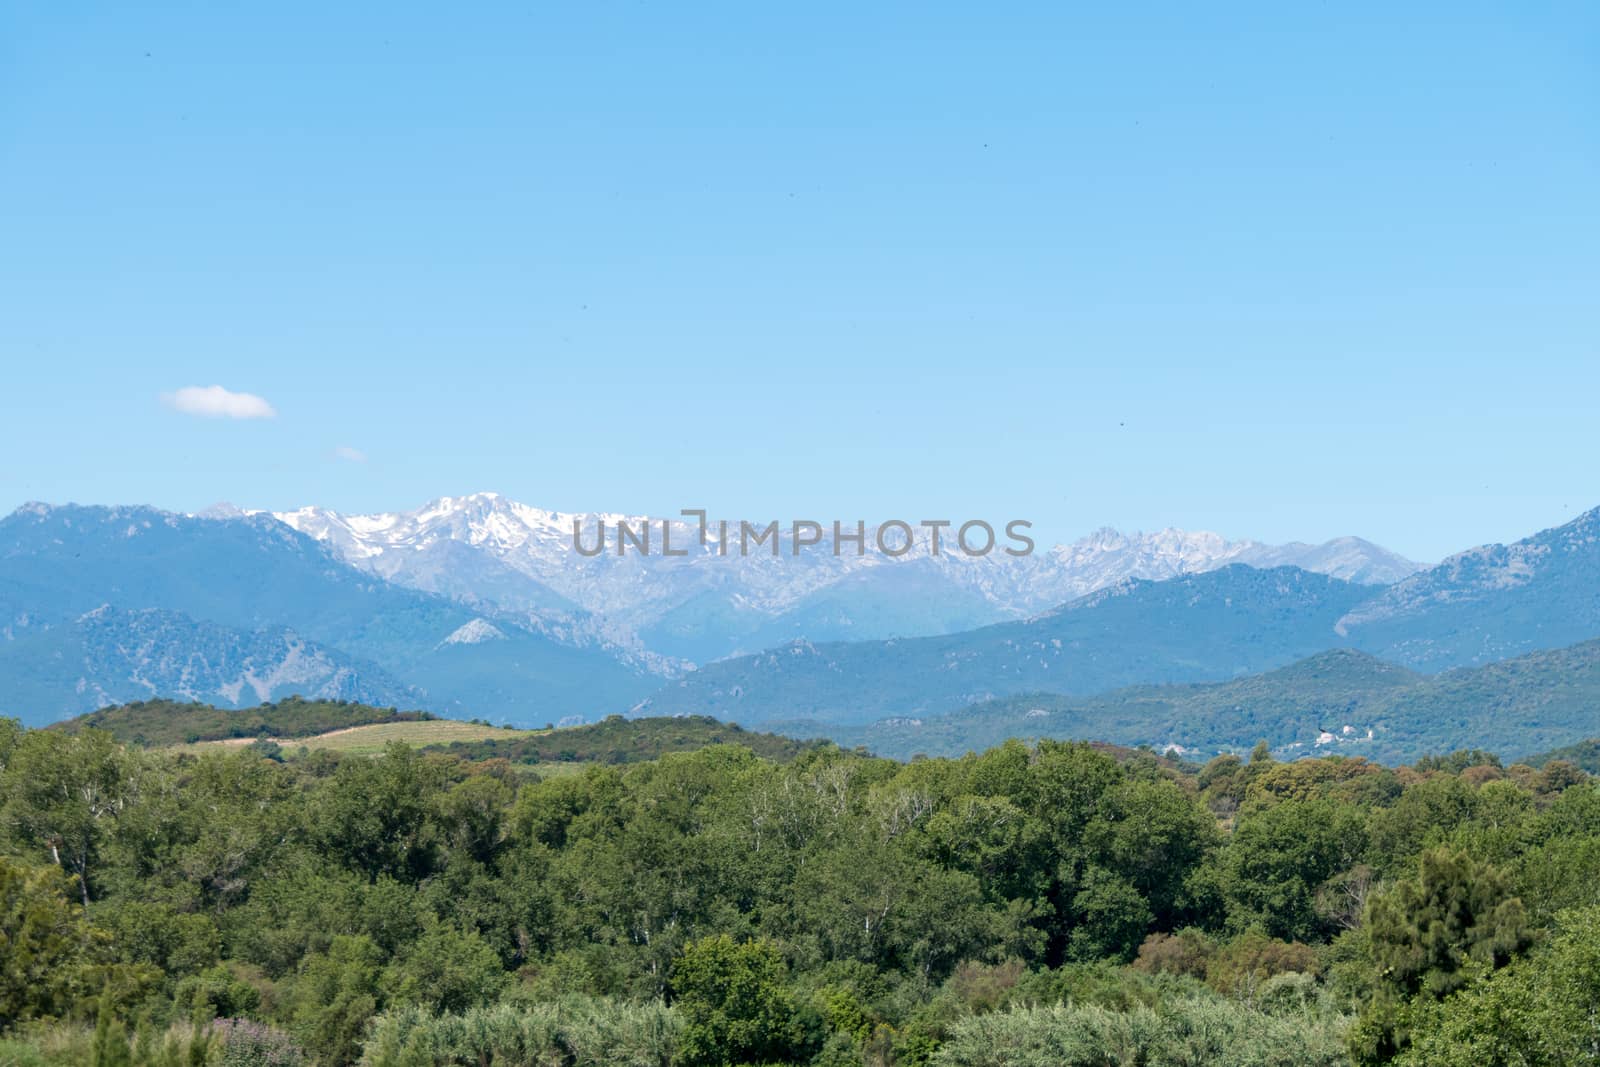 Landscape shot with green forests, mountains and a blue sky by 25ehaag6